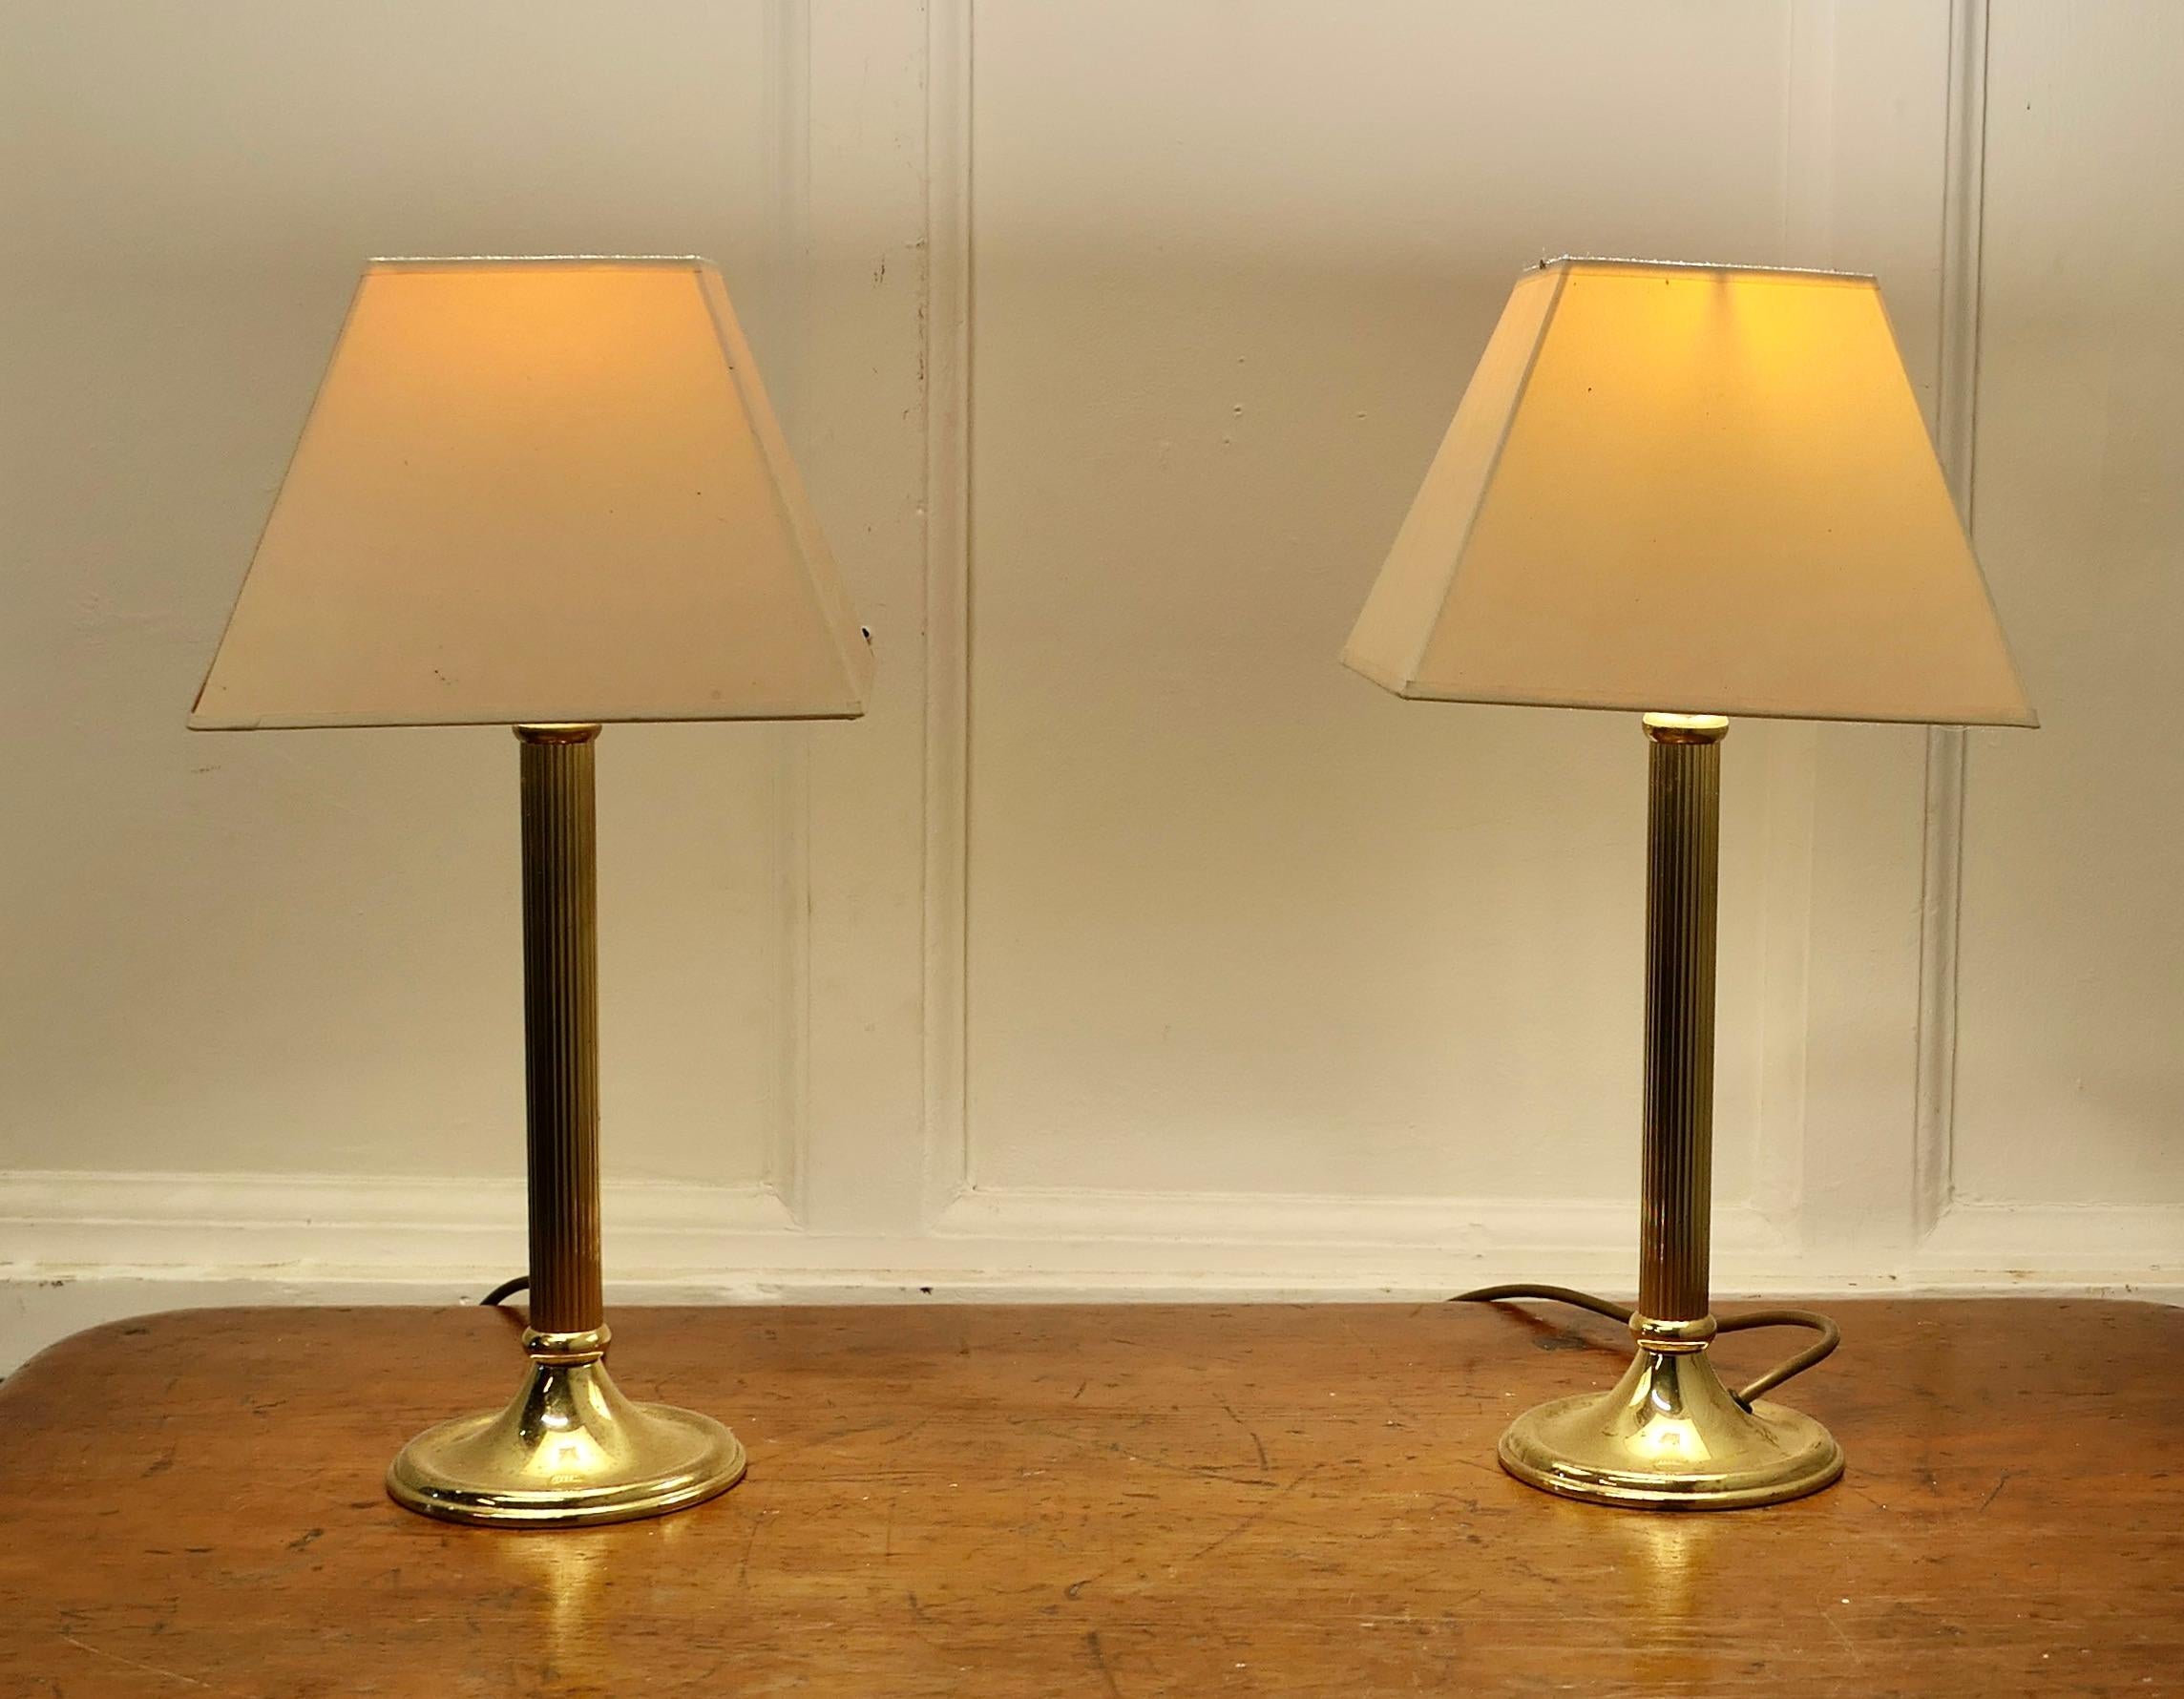 A pair of Dainty Brass Corinthian Column Bedside Lamps with Shades

These are a very attractive pair of lamps they have a single corinthian style column set on a round base, they have square fabric shades
The lamps are in good condition, working and